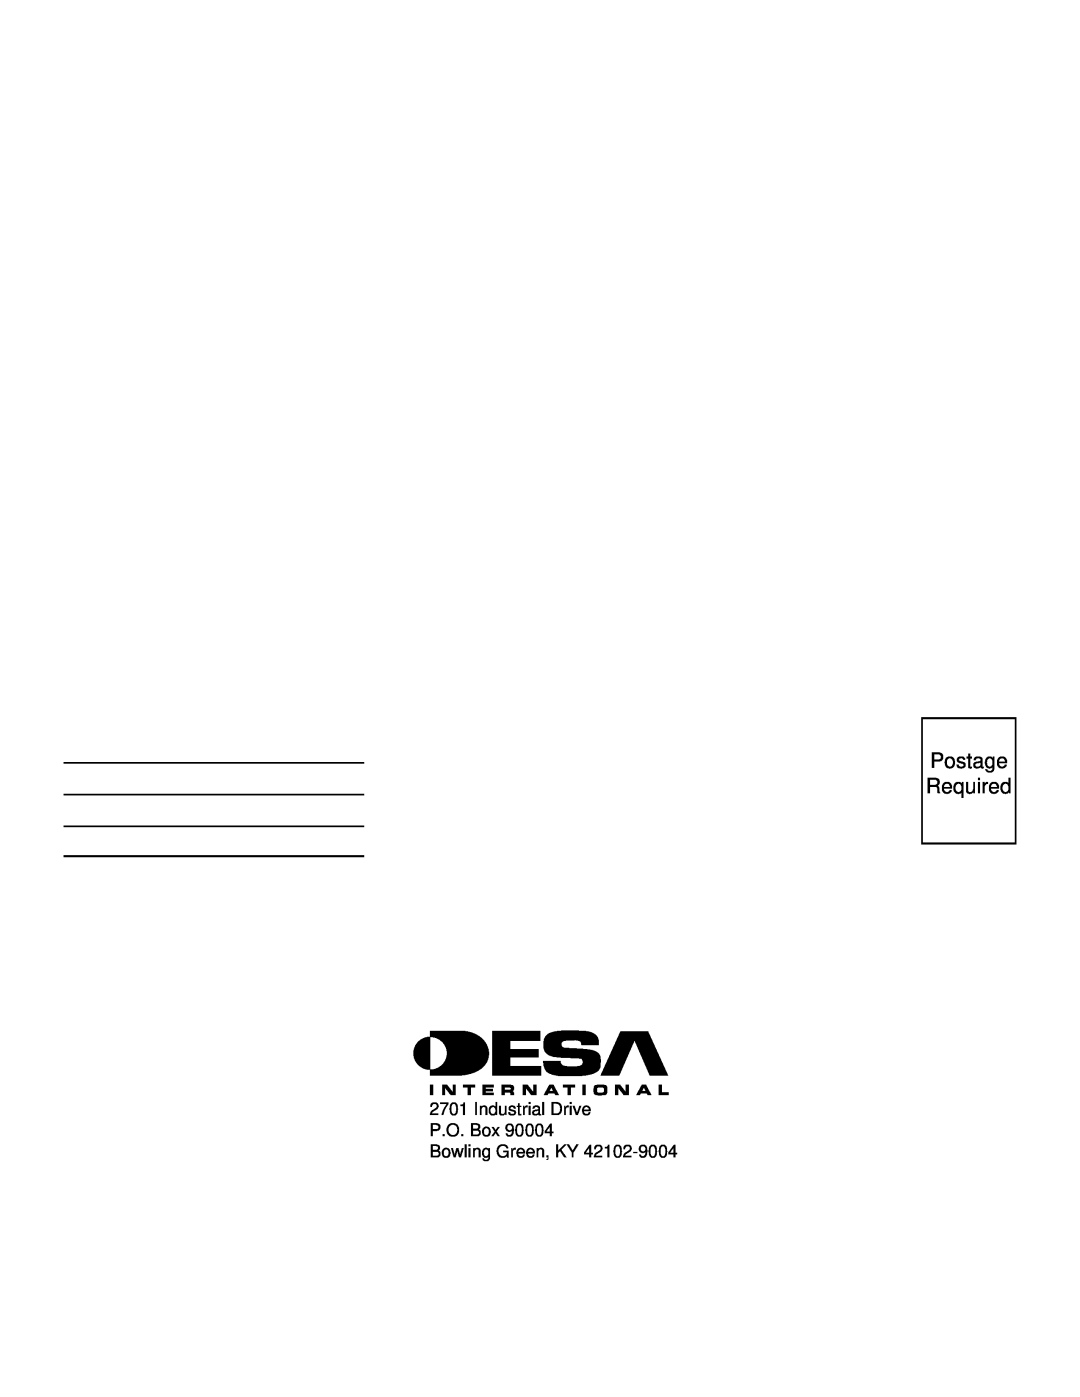 Desa CLD3018PA, CGS3124N, CLD3018NA installation manual Postage Required, Industrial Drive P.O. Box Bowling Green, KY 